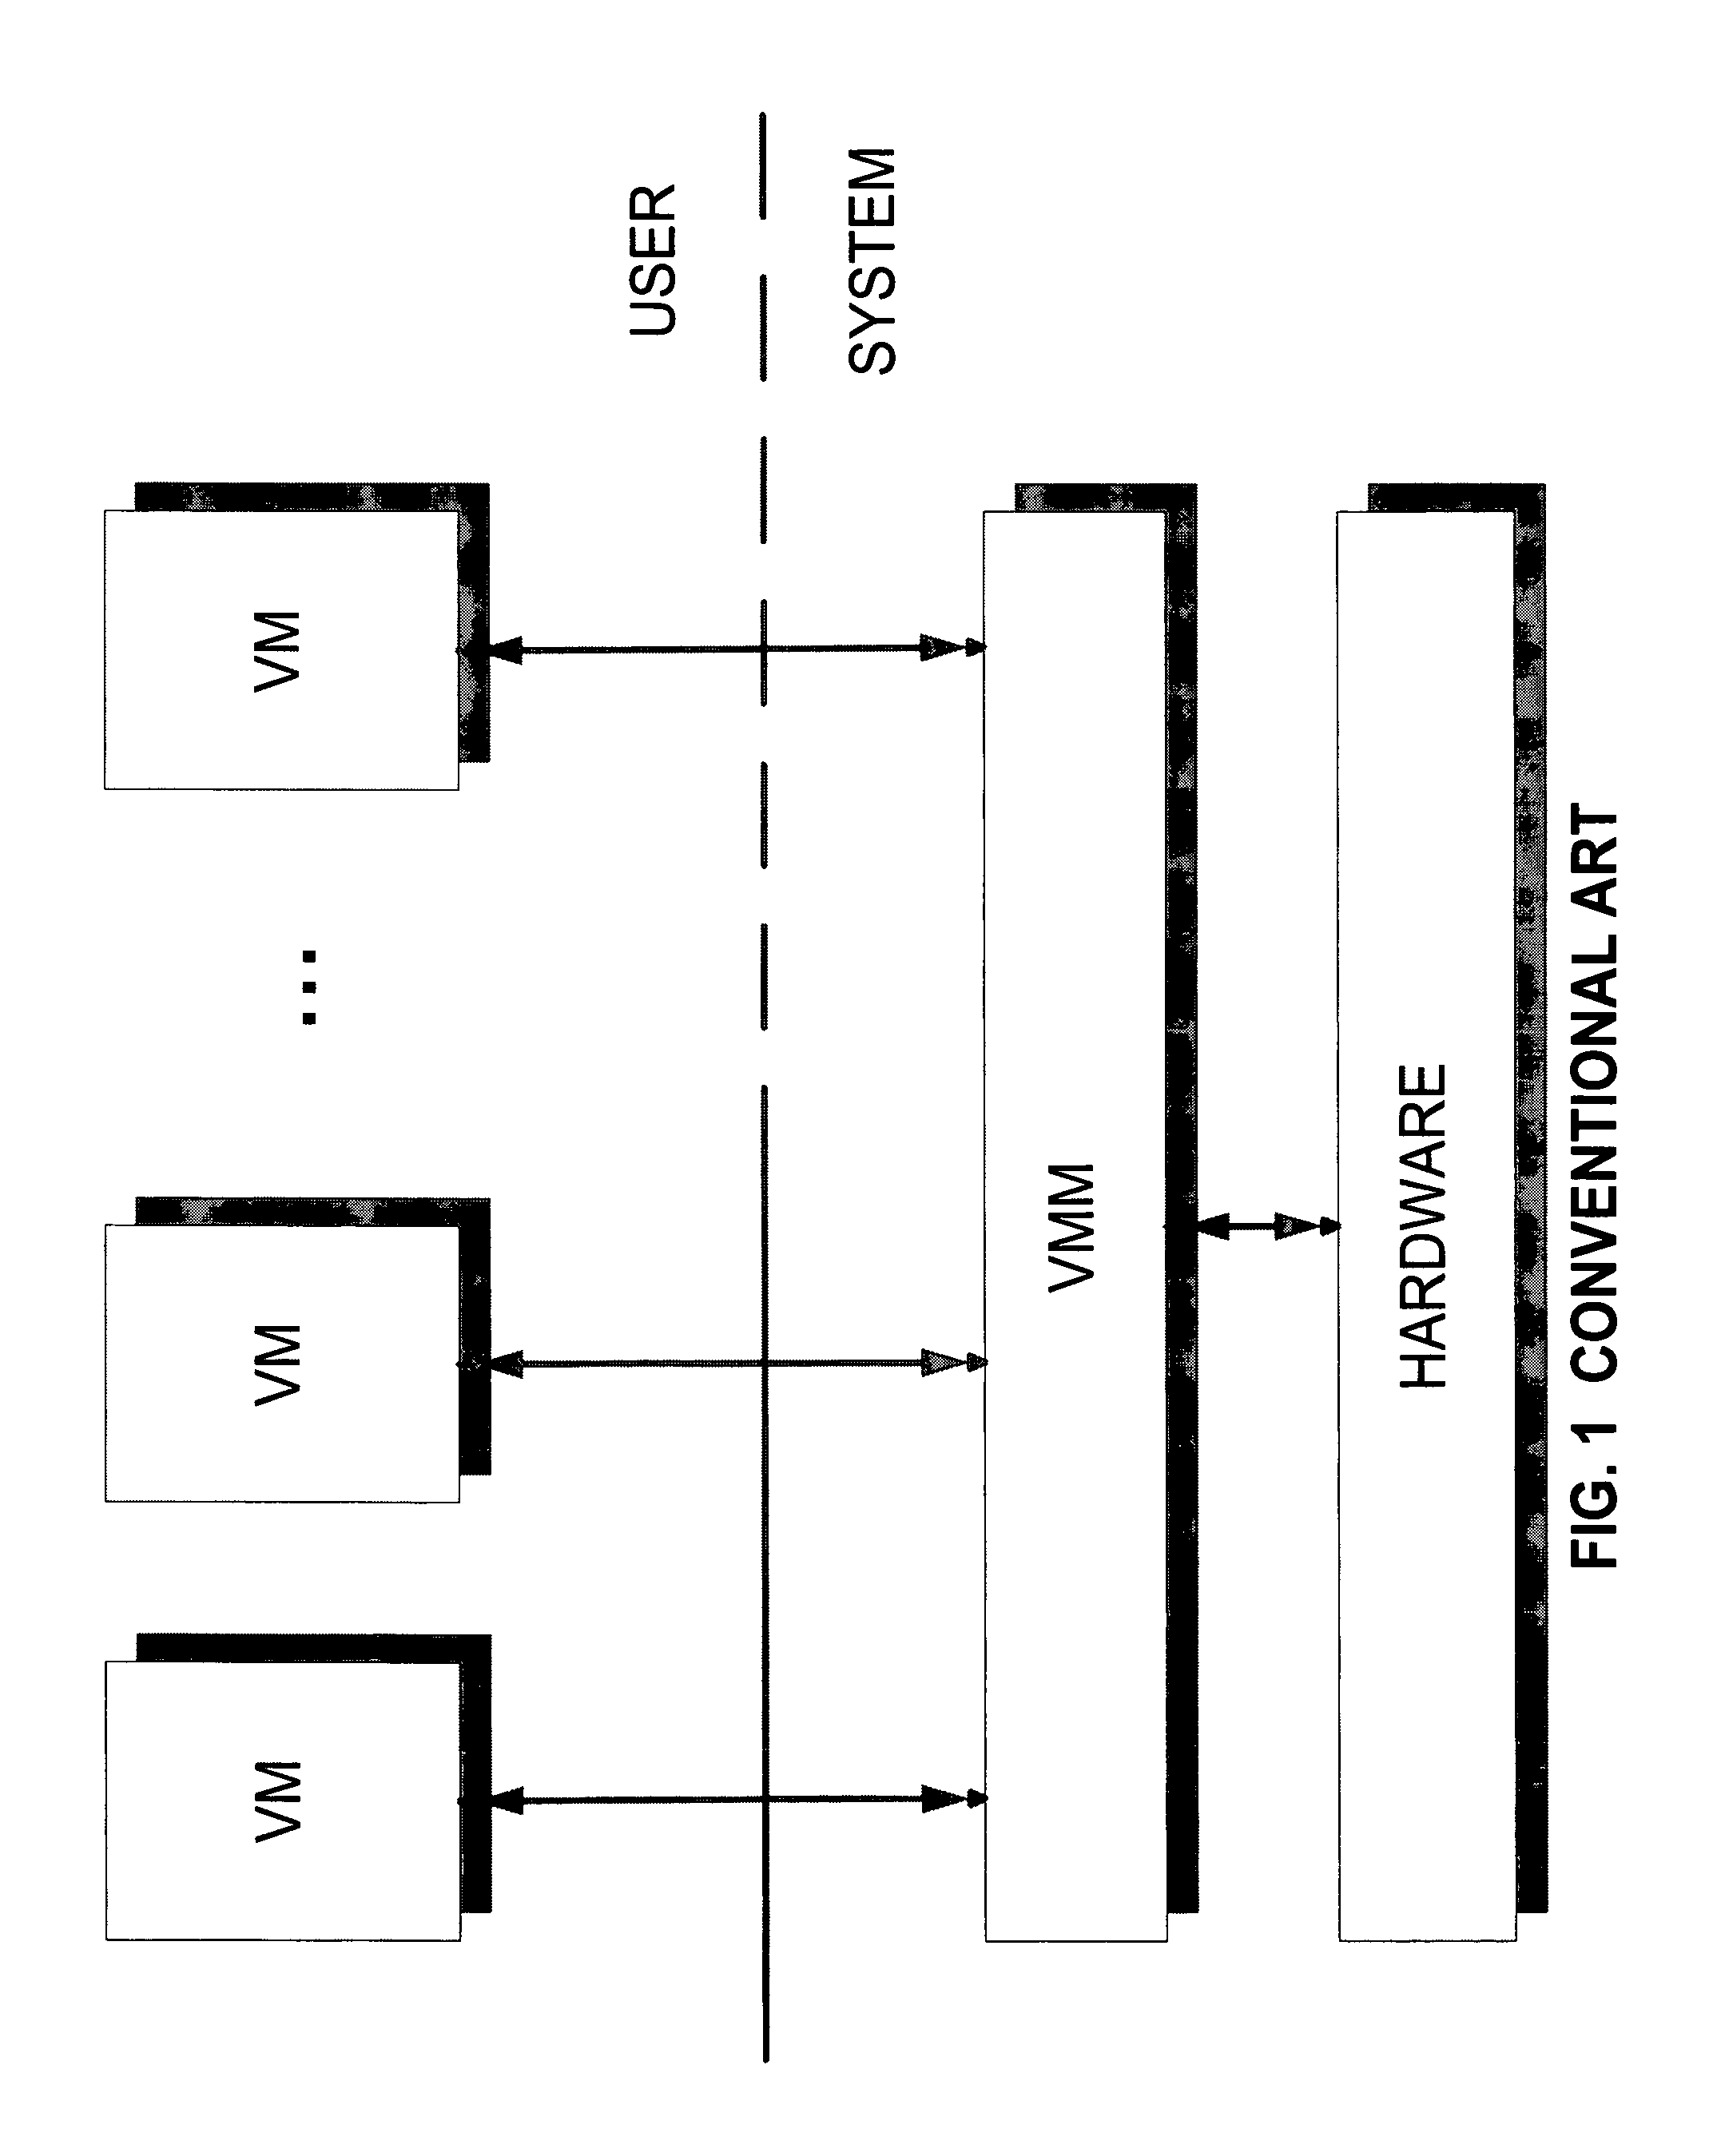 System and method for starting virtual machine monitor in common with already installed operating system